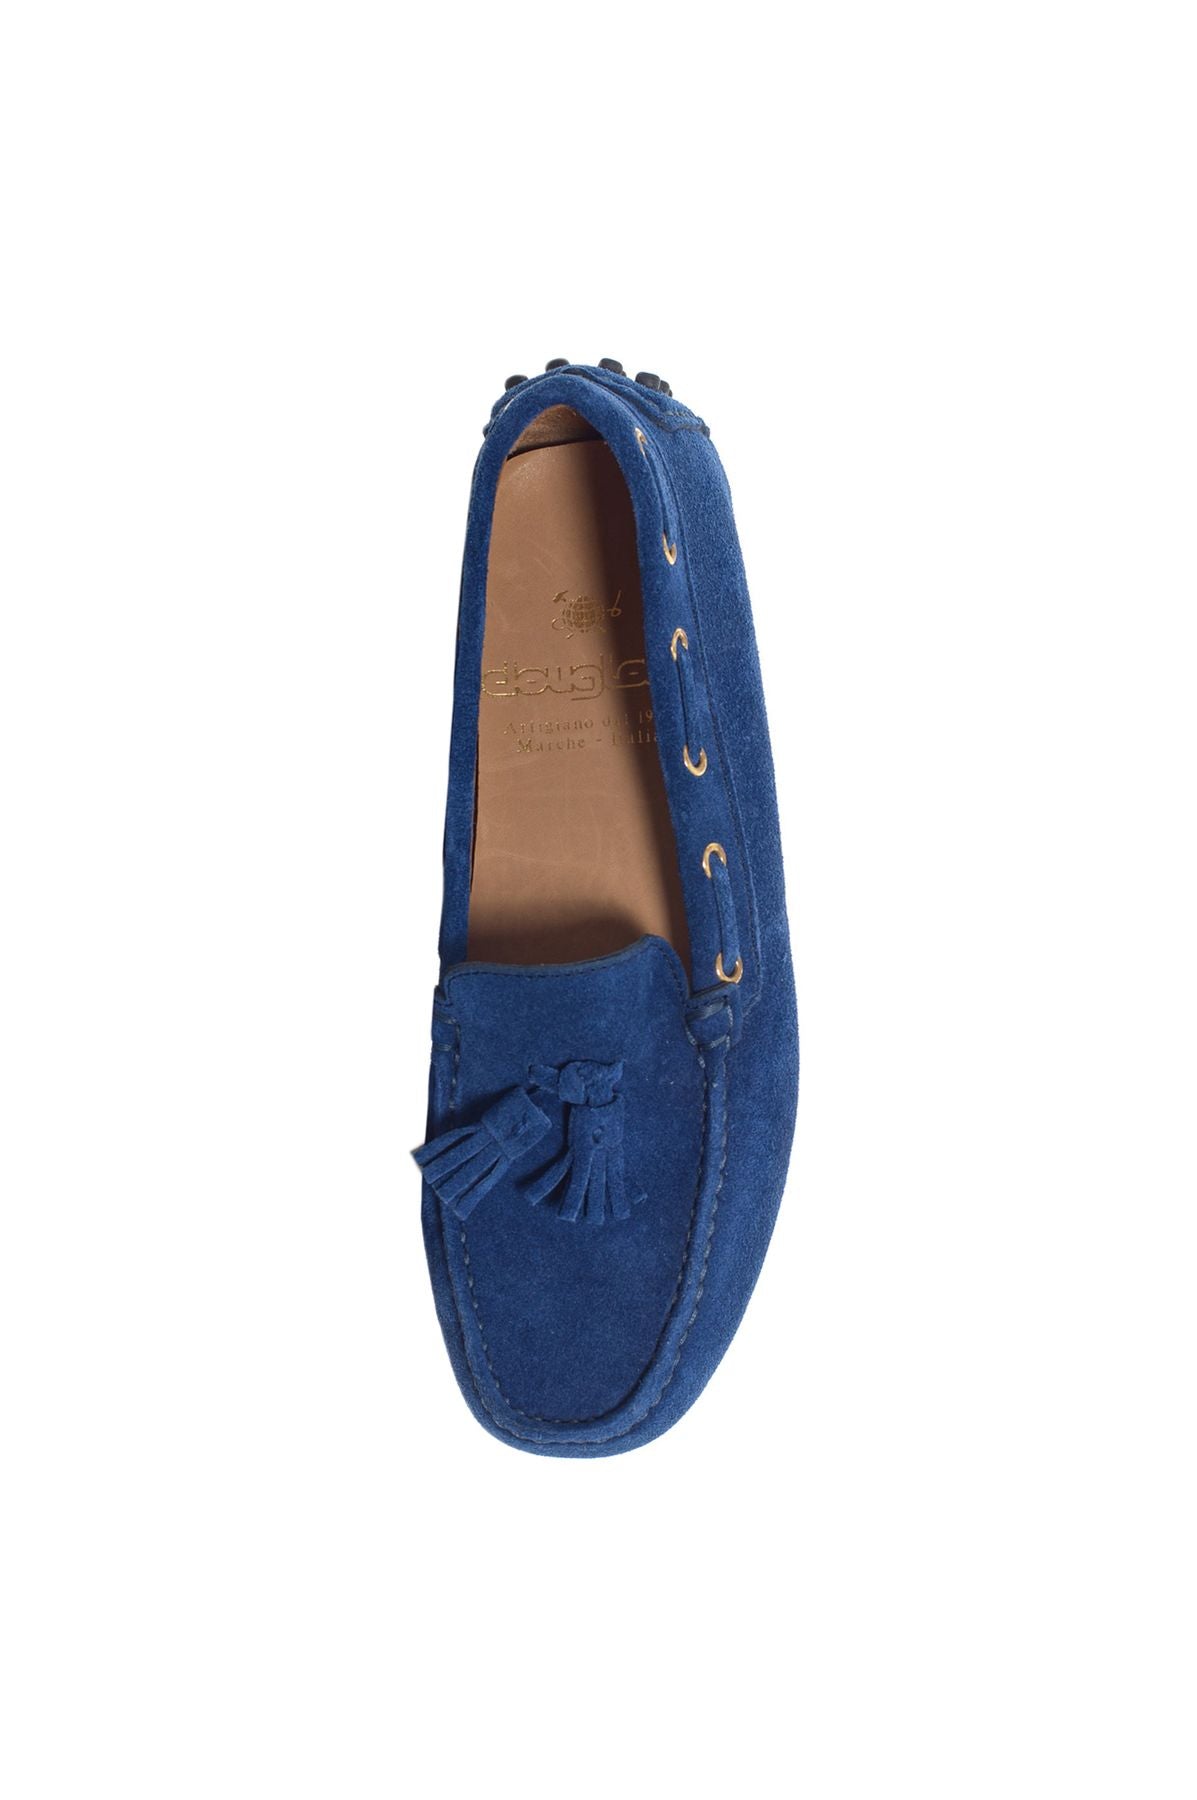 Douglas Spring/Summer Leather Loafers